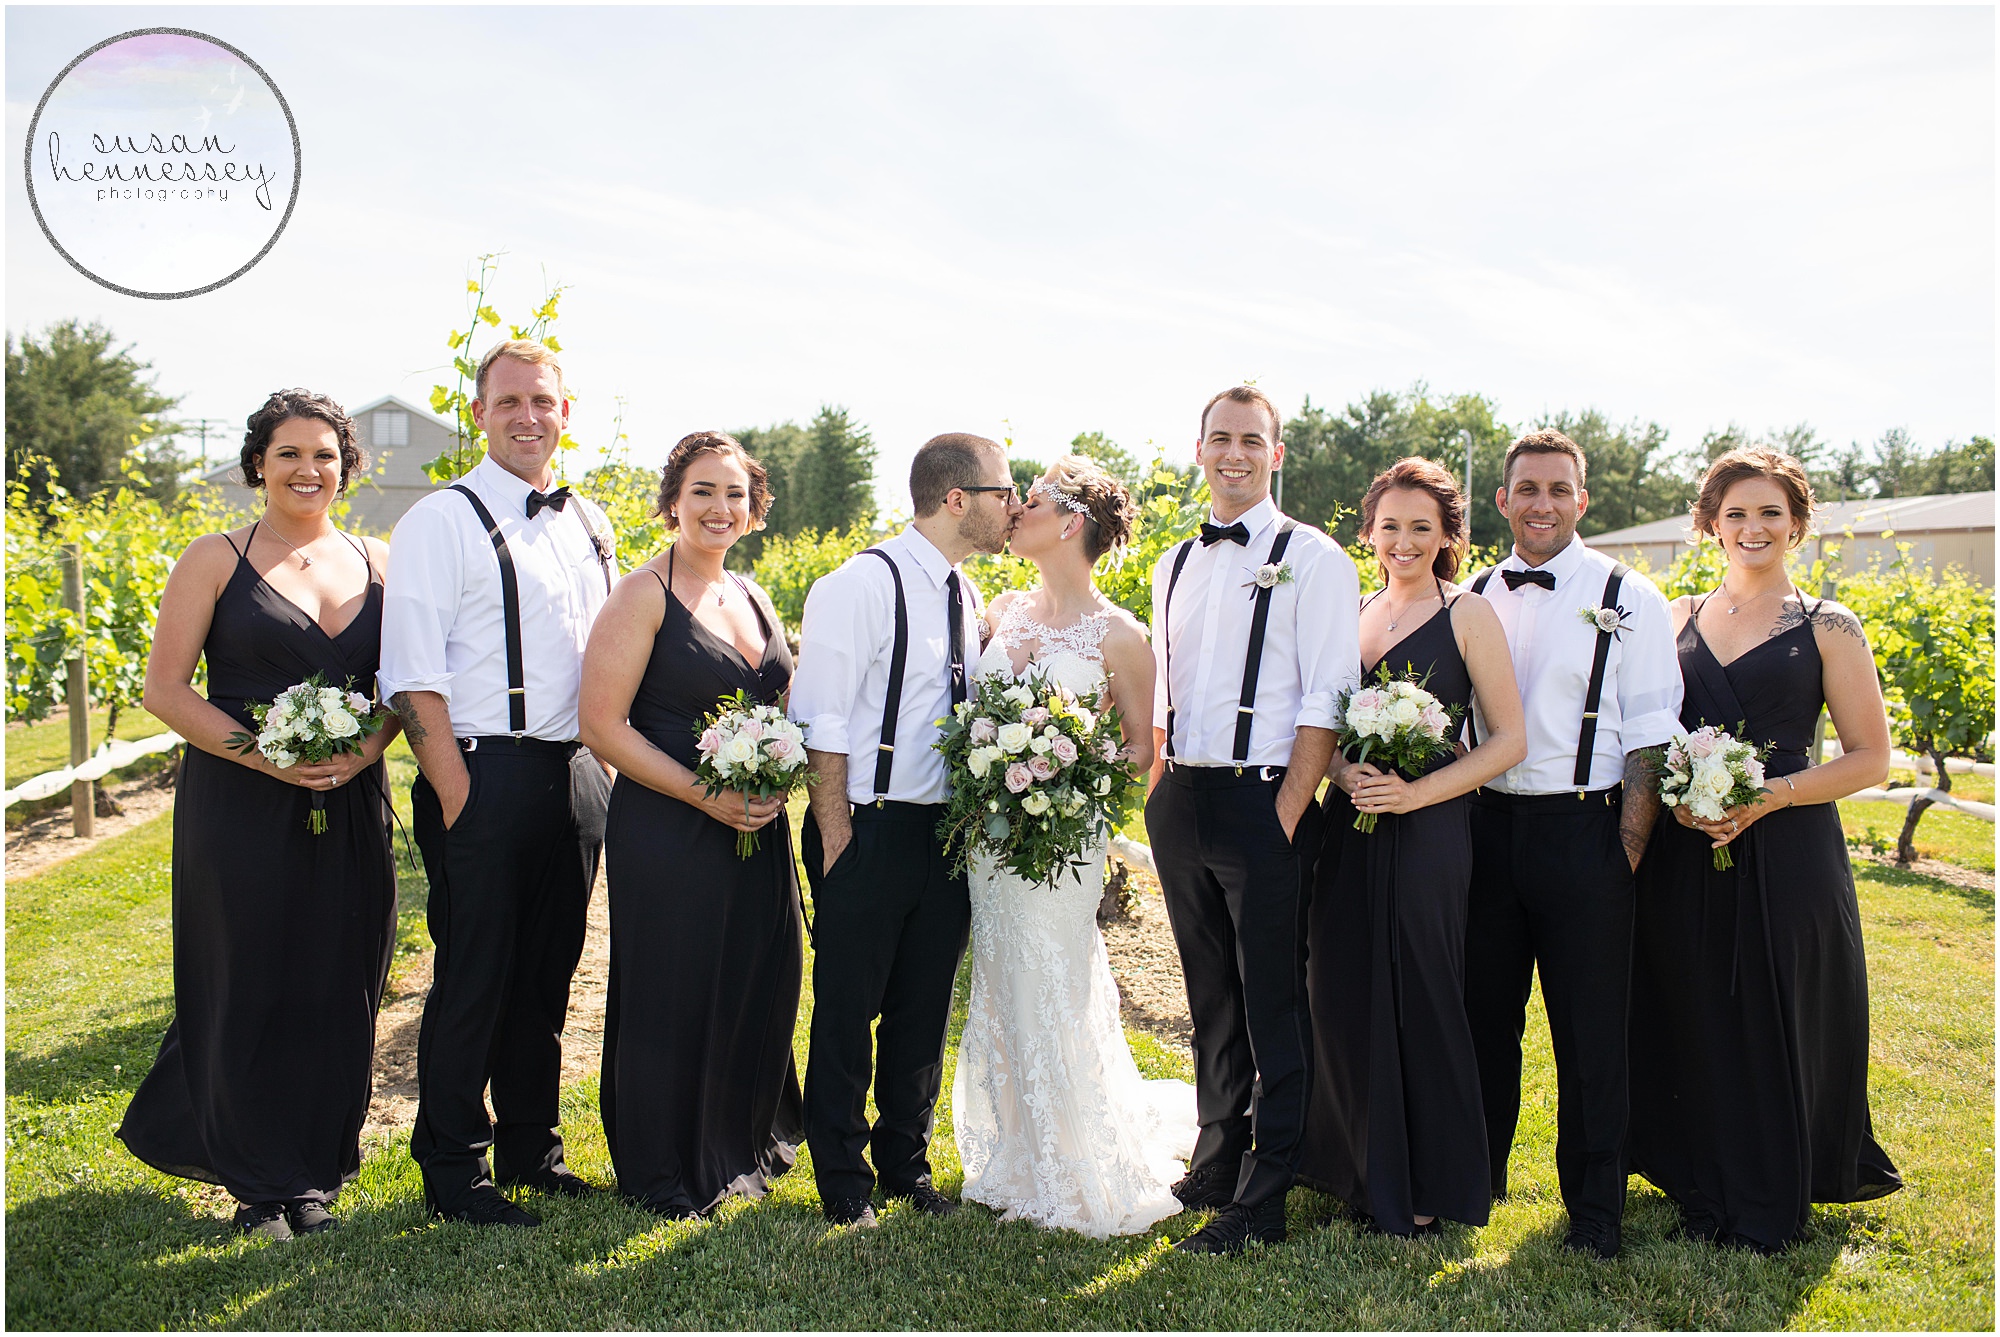 Bridal party in the vineyard at Tomasello Winery